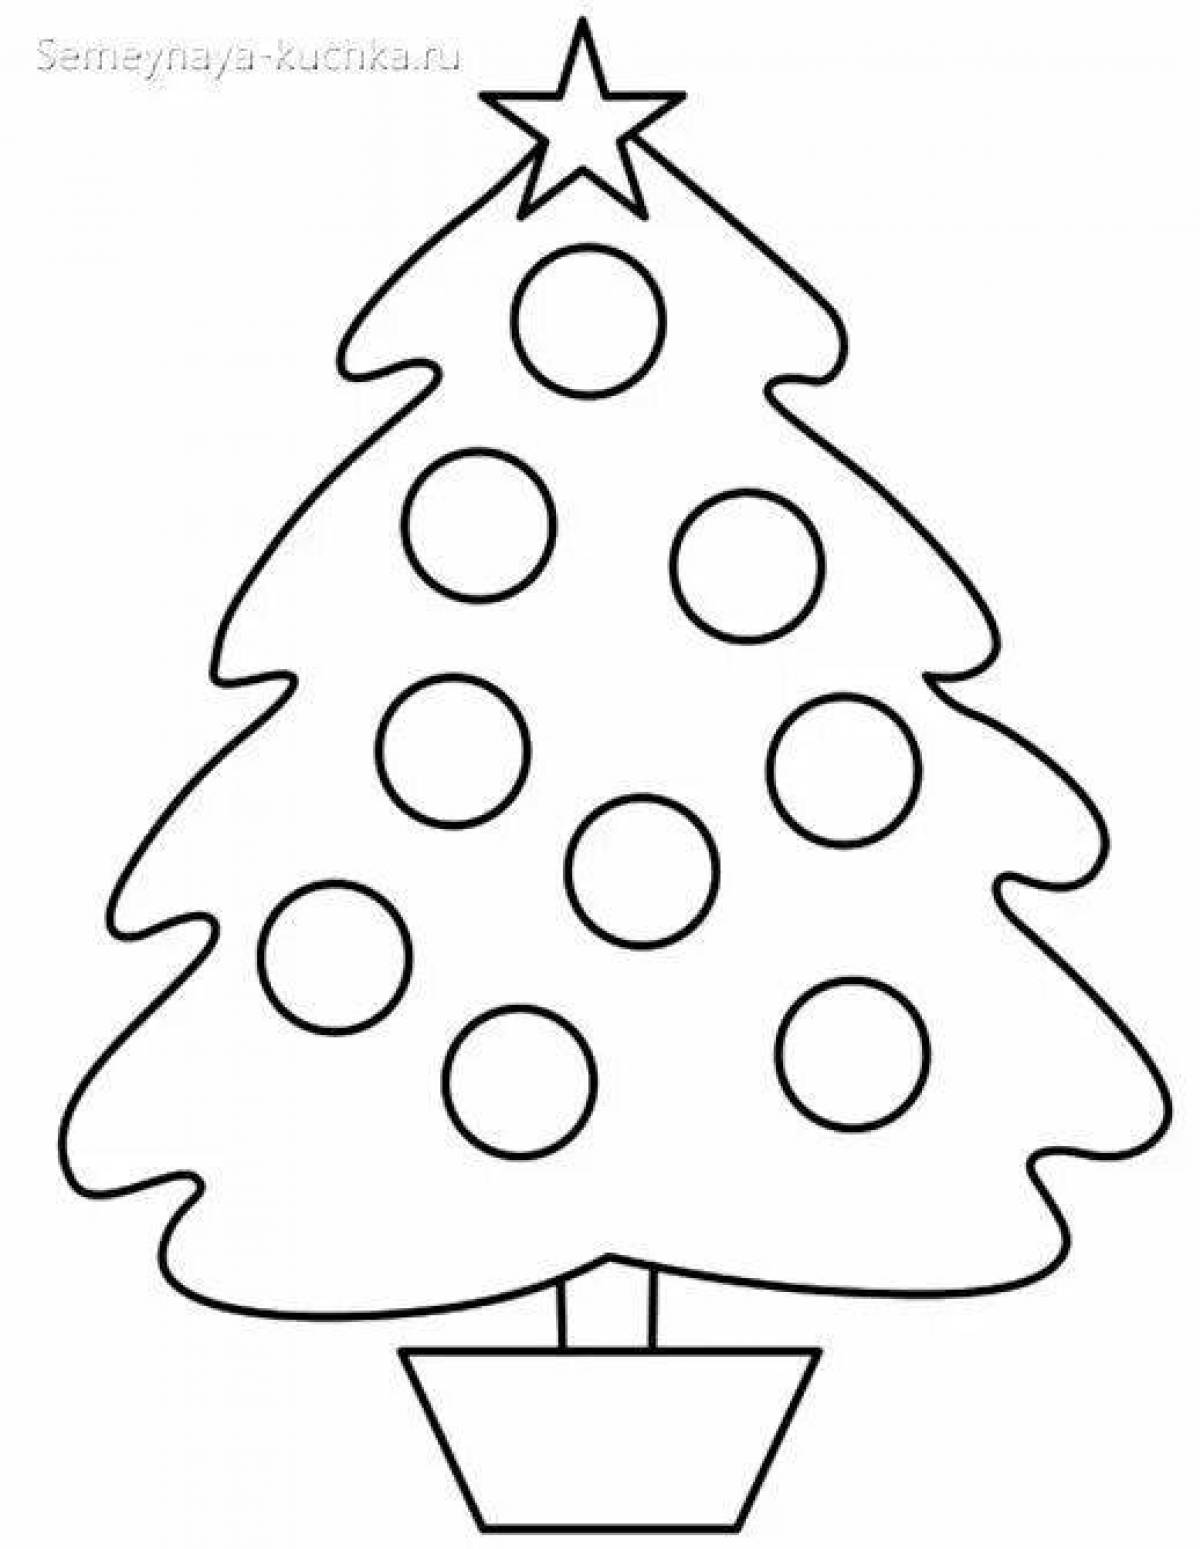 Exquisite christmas tree coloring page template